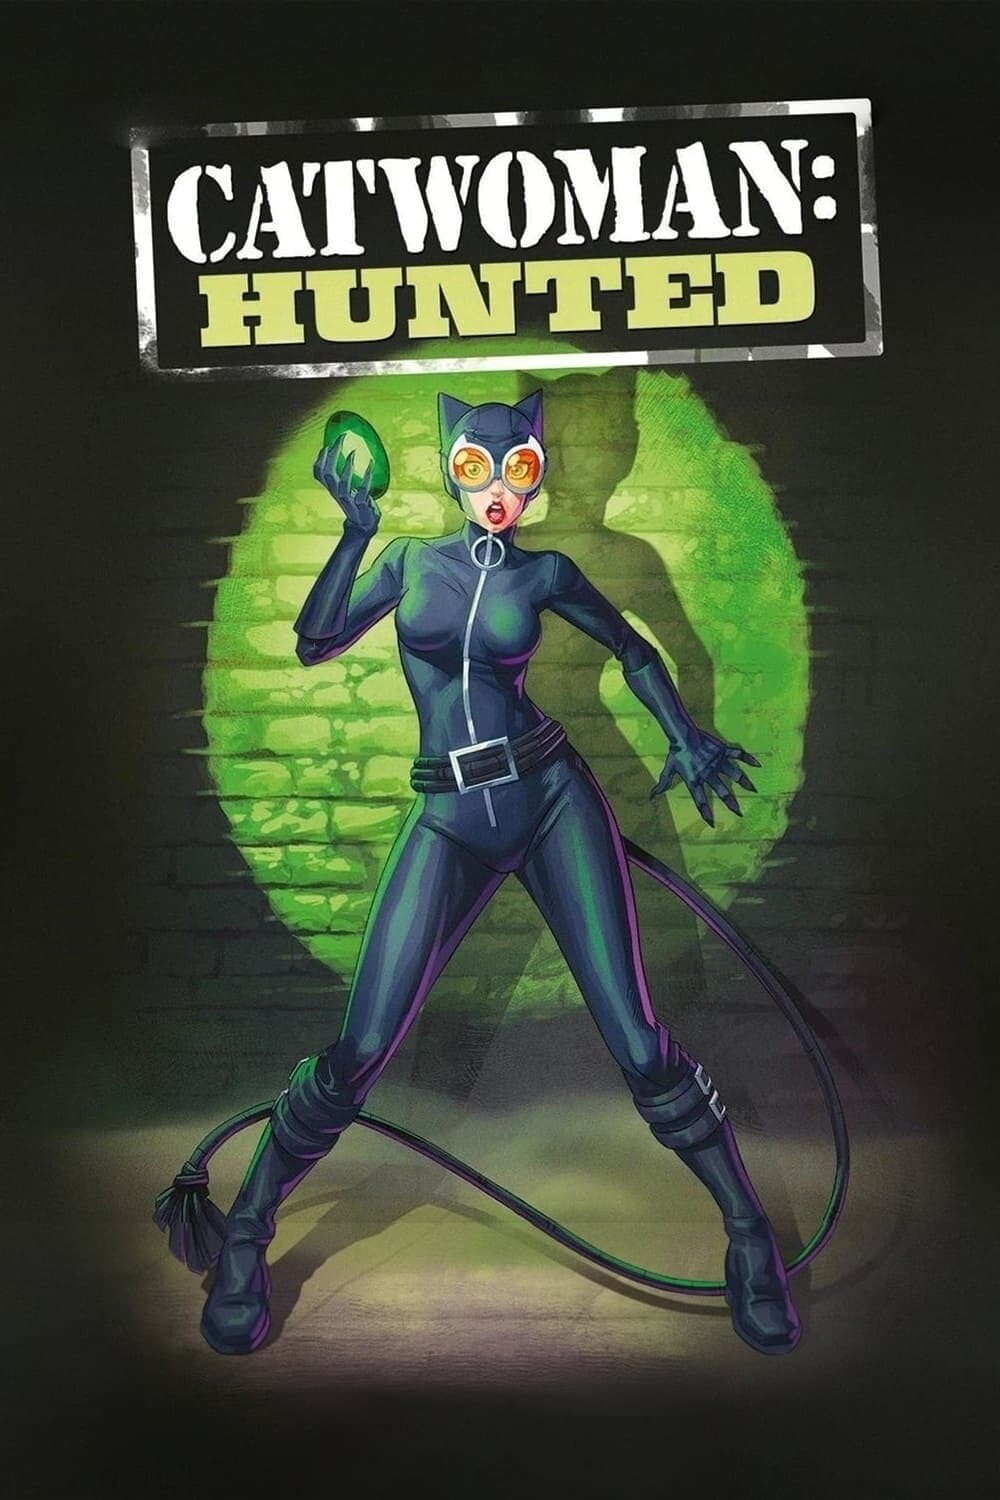 Catwoman Hunted 2022 COMPLETE UHD BLURAY-B0MBARDiERS